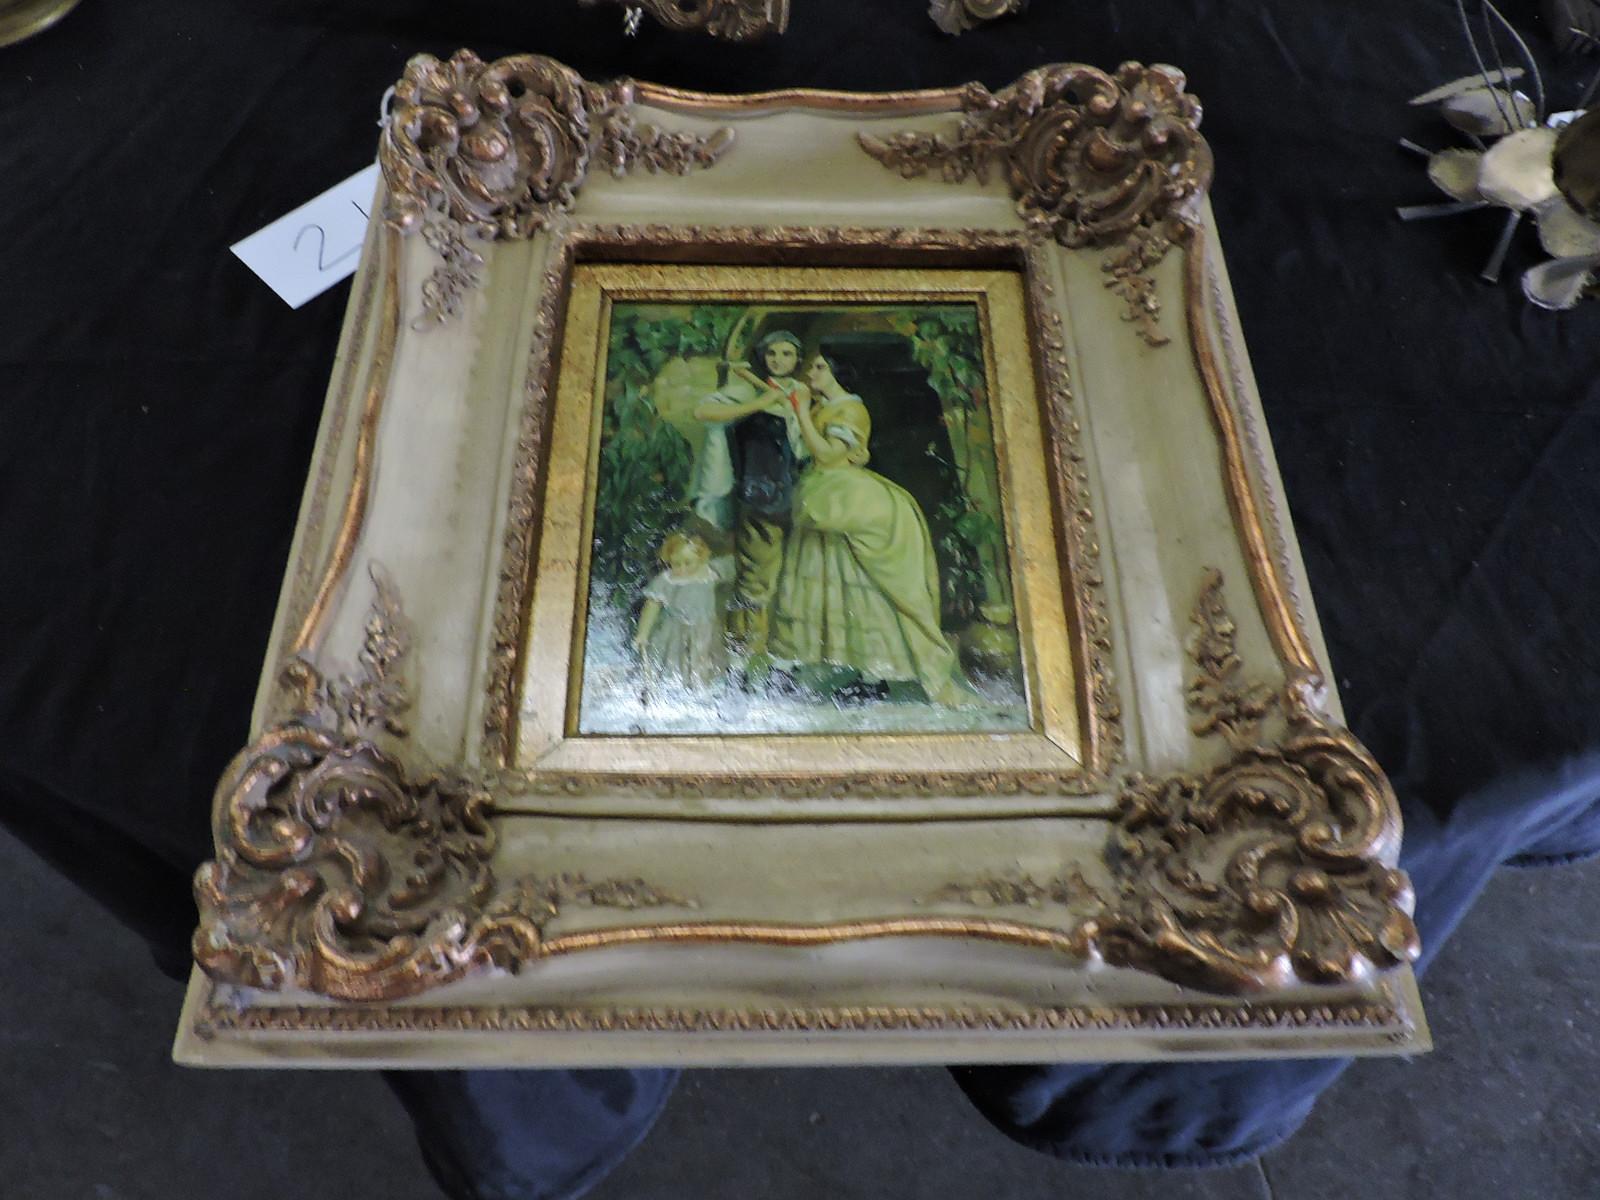 Antique Oil Painting of a Family - with Guilded Frame - by E. Hartman / Likely early 1900's